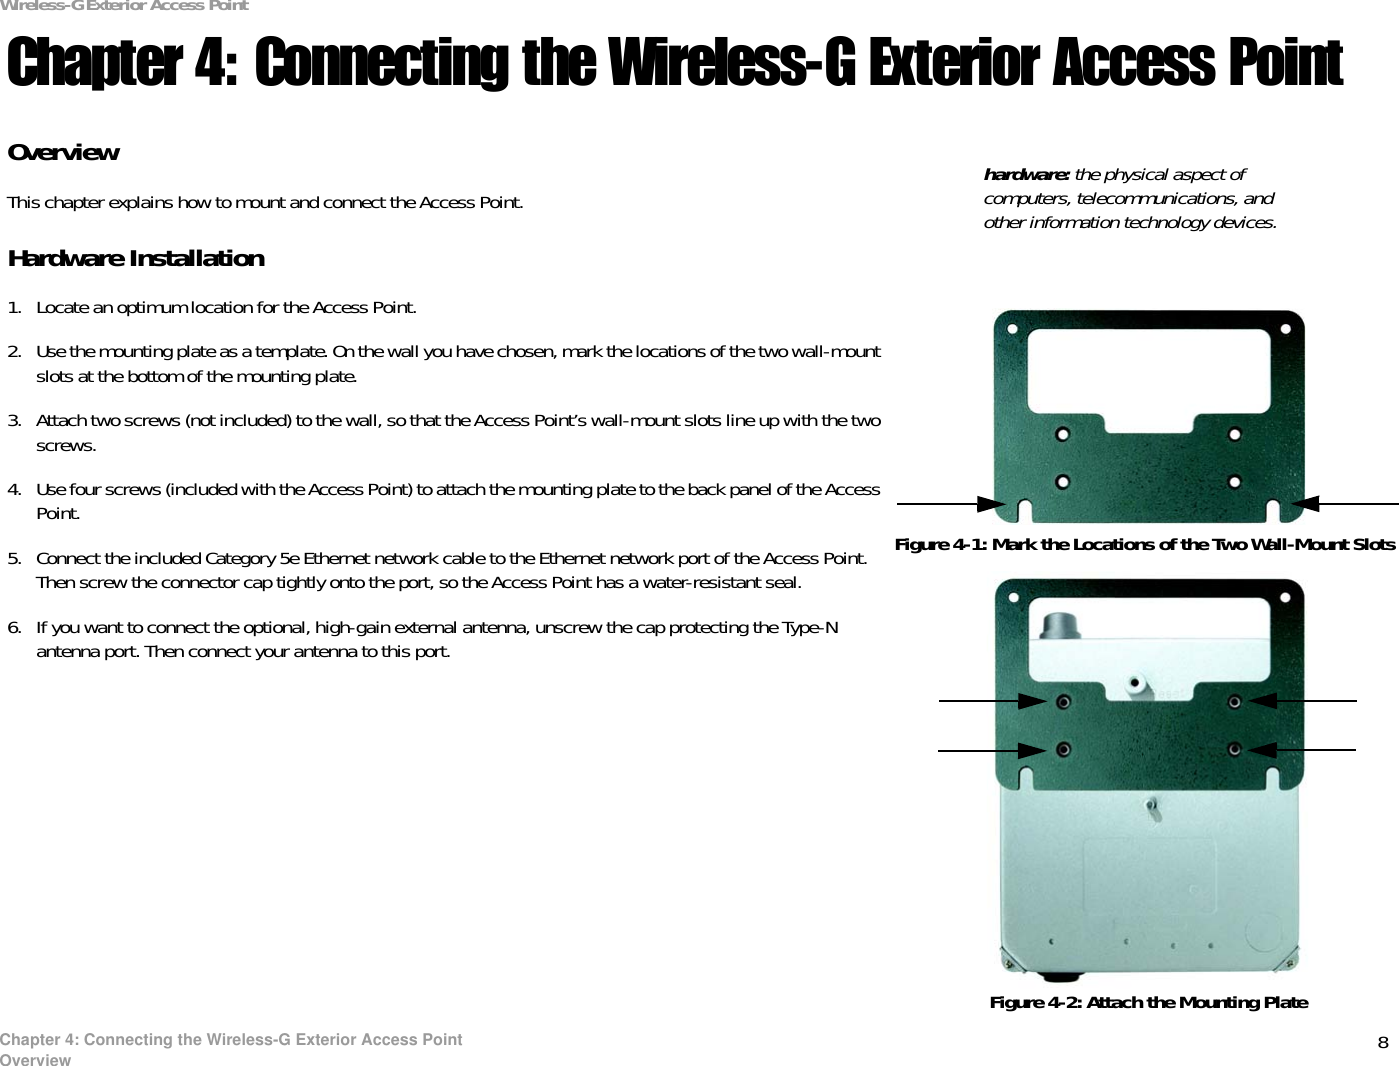 8Chapter 4: Connecting the Wireless-G Exterior Access PointOverviewWireless-G Exterior Access PointChapter 4: Connecting the Wireless-G Exterior Access PointOverviewThis chapter explains how to mount and connect the Access Point.Hardware Installation1. Locate an optimum location for the Access Point.2. Use the mounting plate as a template. On the wall you have chosen, mark the locations of the two wall-mount slots at the bottom of the mounting plate.3. Attach two screws (not included) to the wall, so that the Access Point’s wall-mount slots line up with the two screws.4. Use four screws (included with the Access Point) to attach the mounting plate to the back panel of the Access Point.5. Connect the included Category 5e Ethernet network cable to the Ethernet network port of the Access Point. Then screw the connector cap tightly onto the port, so the Access Point has a water-resistant seal.6. If you want to connect the optional, high-gain external antenna, unscrew the cap protecting the Type-N antenna port. Then connect your antenna to this port.hardware: the physical aspect of computers, telecommunications, and other information technology devices.Figure 4-1: Mark the Locations of the Two Wall-Mount SlotsFigure 4-2: Attach the Mounting Plate